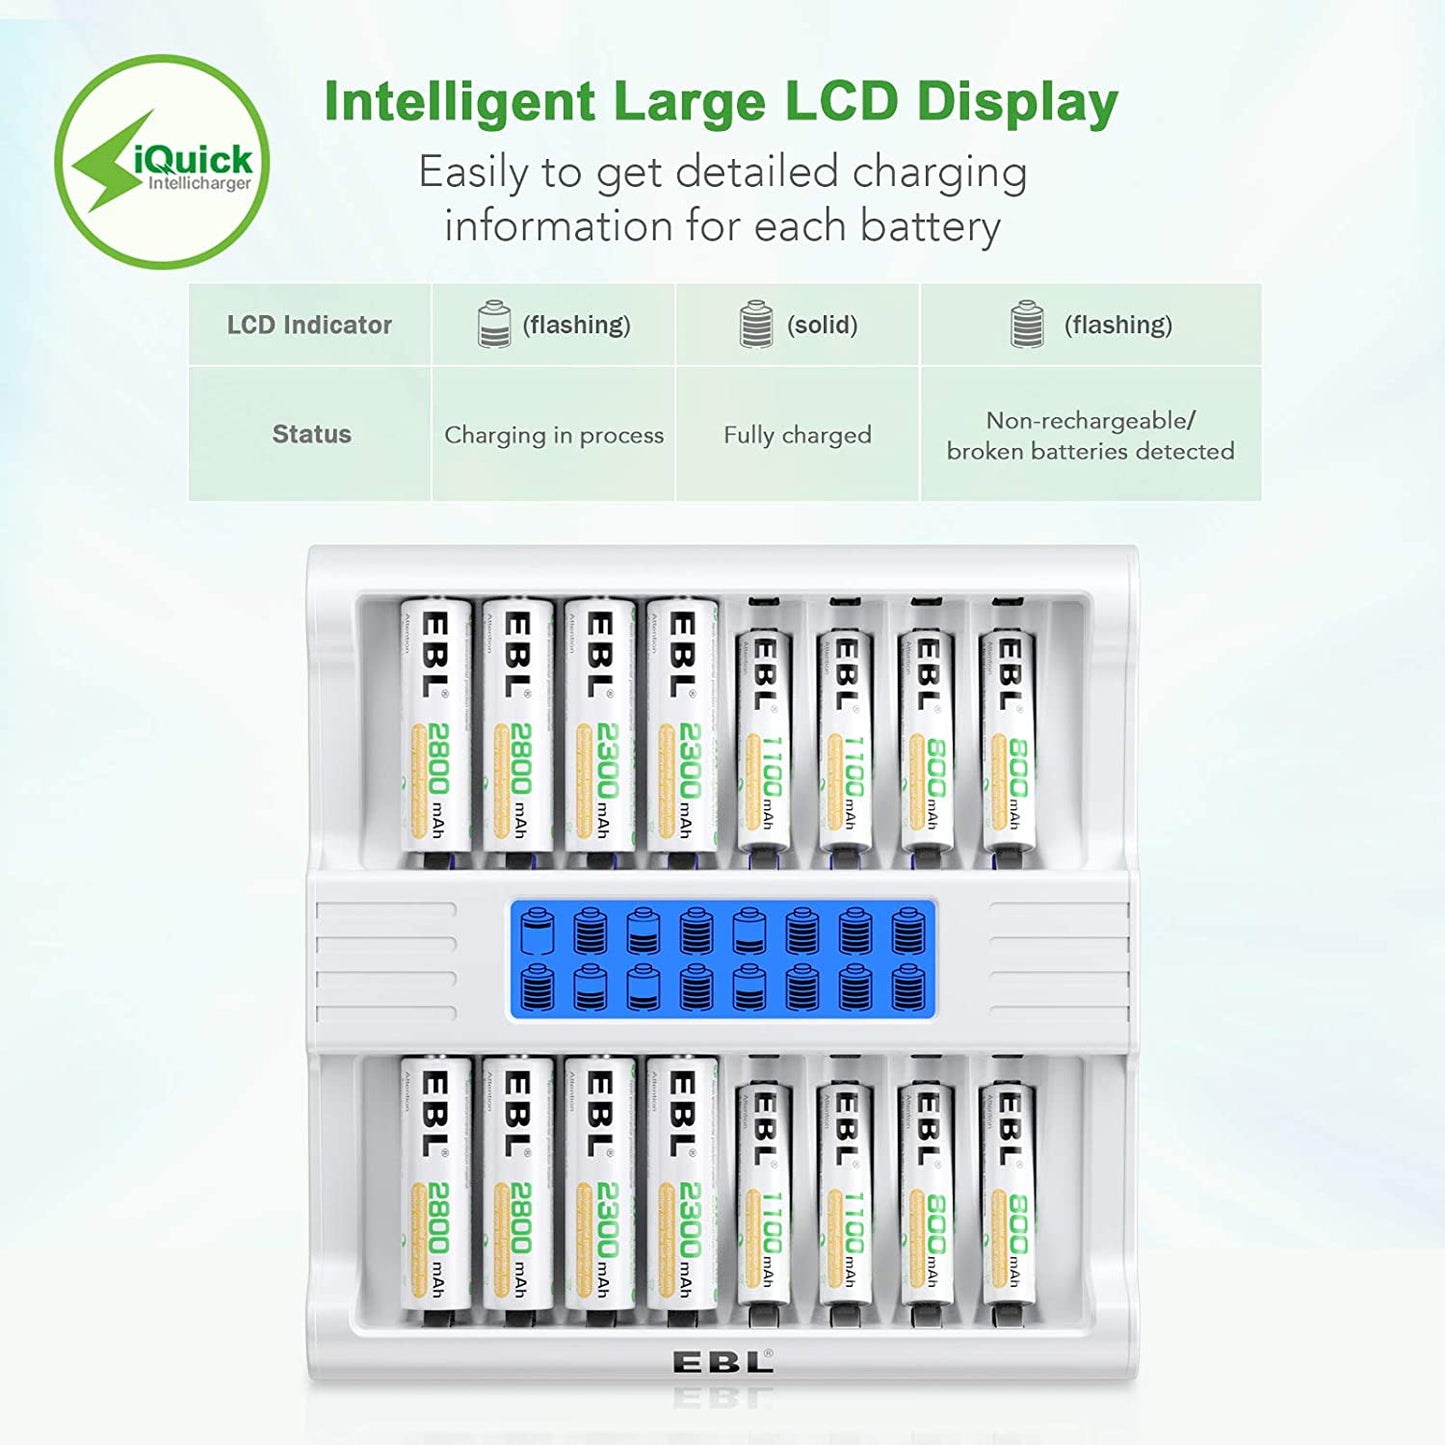 EBL TB-6178 16-Bay Smart Battery Charger with LCD Status Display, Independently Controlled Fast Charging Slots, and Built-In Overcharging Protection for AA AAA NiMH Rechargeable Batteries